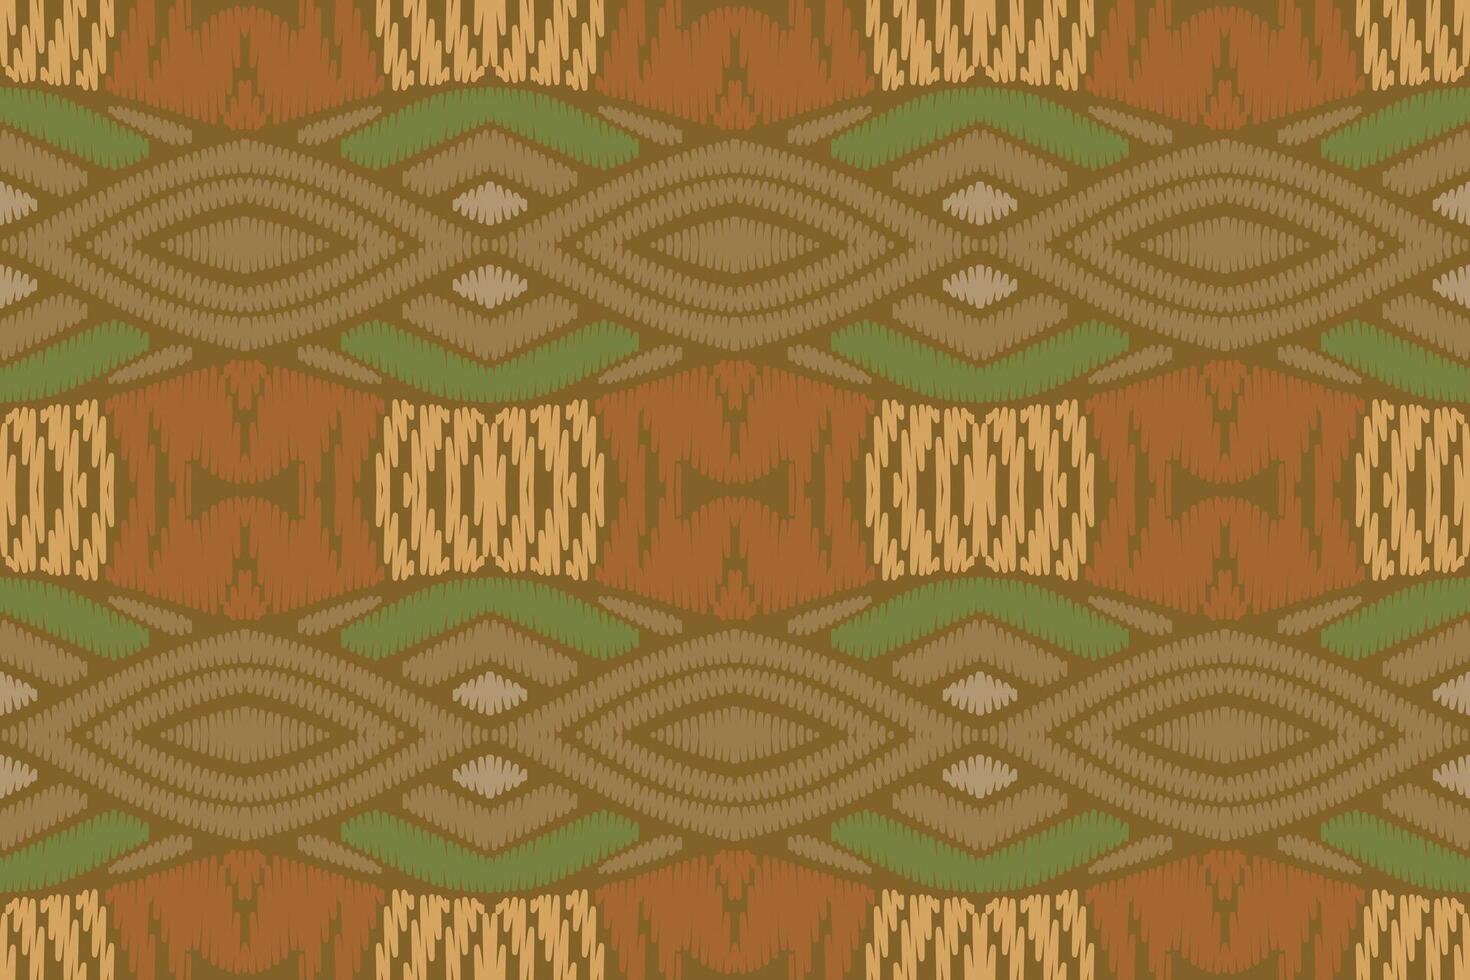 Ikat pattern in tribal. Geometric ethnic traditional. Mexican striped style. Design for background, wallpaper, vector illustration, fabric, clothing, batik, carpet, embroidery.